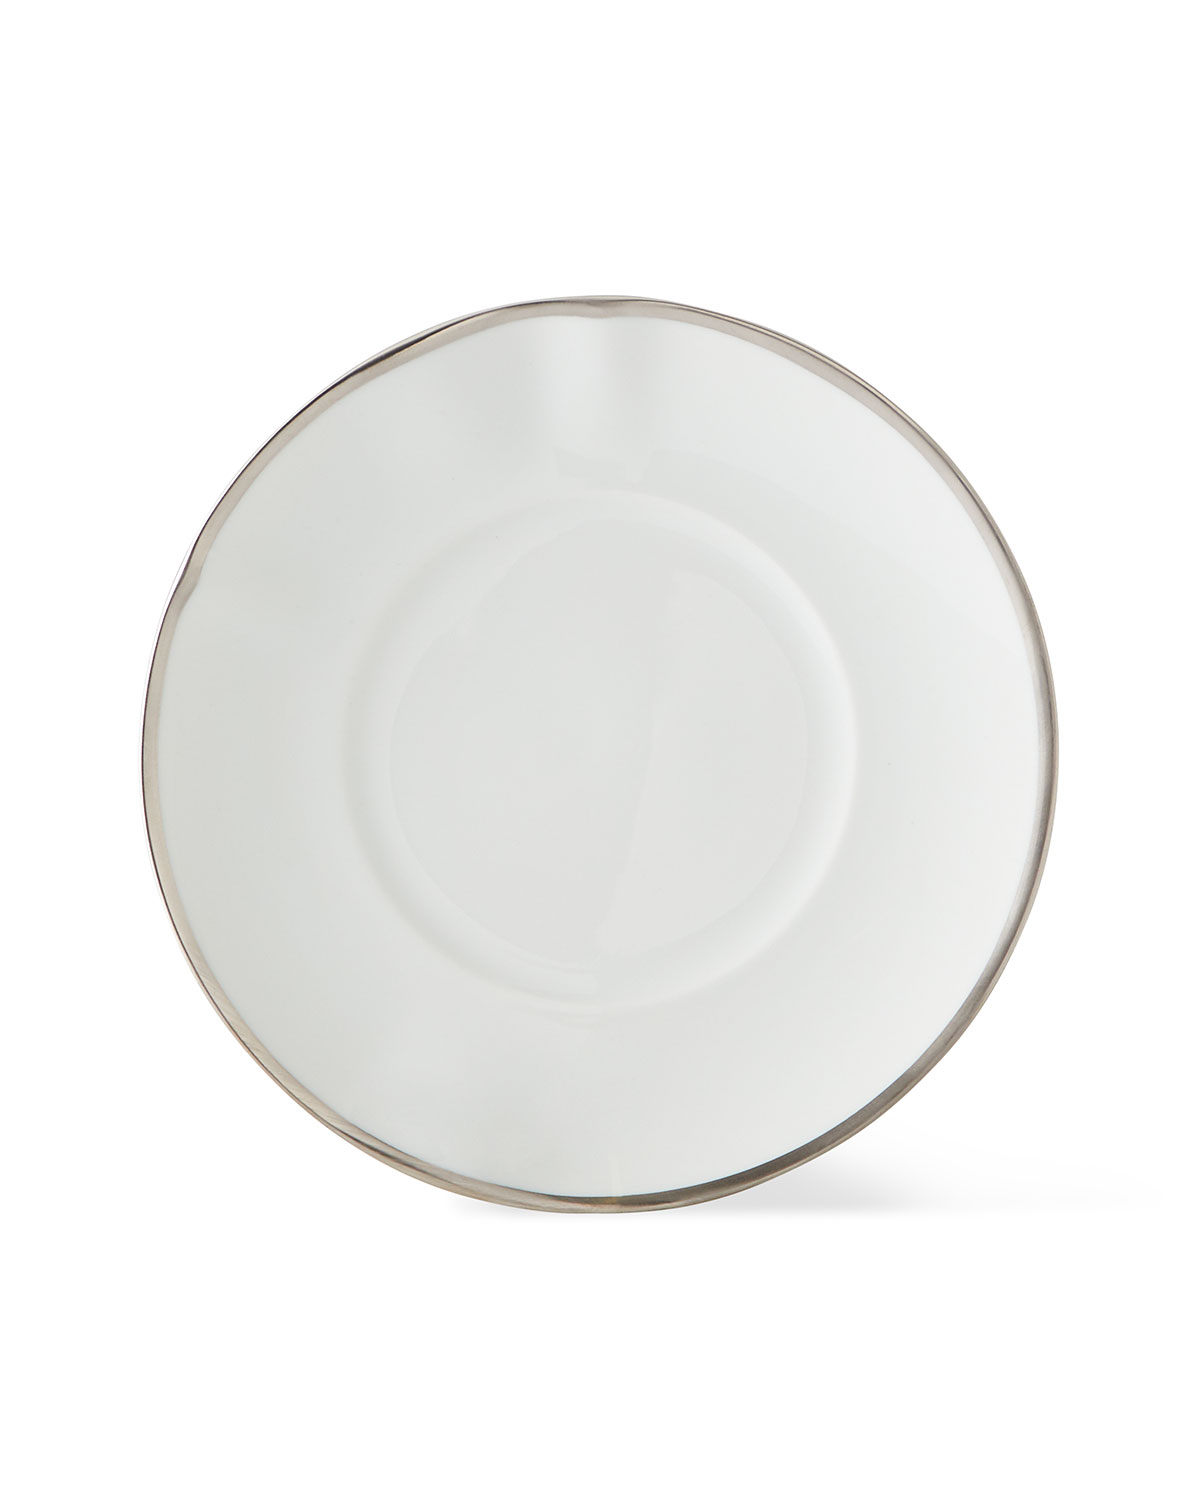 ANNA WEATHERLEY SIMPLY ELEGANT BREAD & BUTTER PLATE,PROD222920378